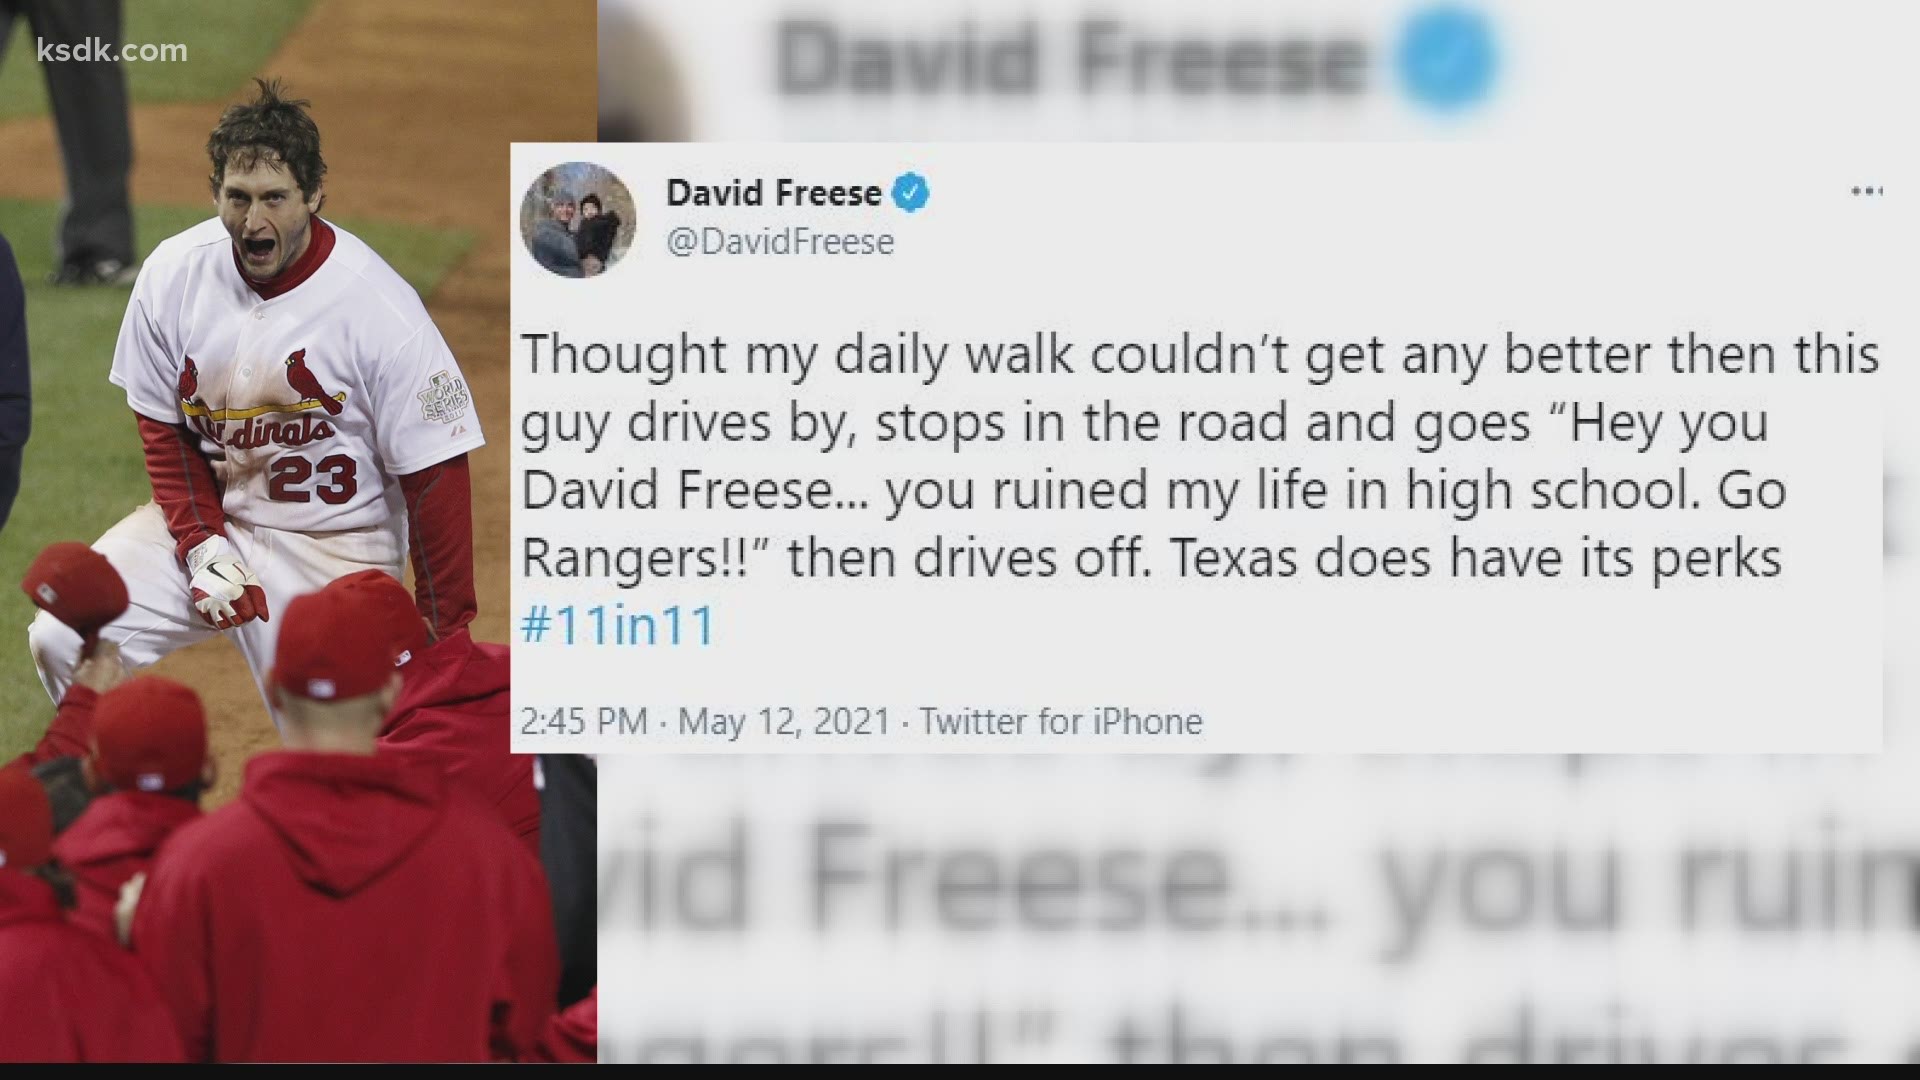 2011 World Series hero David Freese gets heckled in Texas